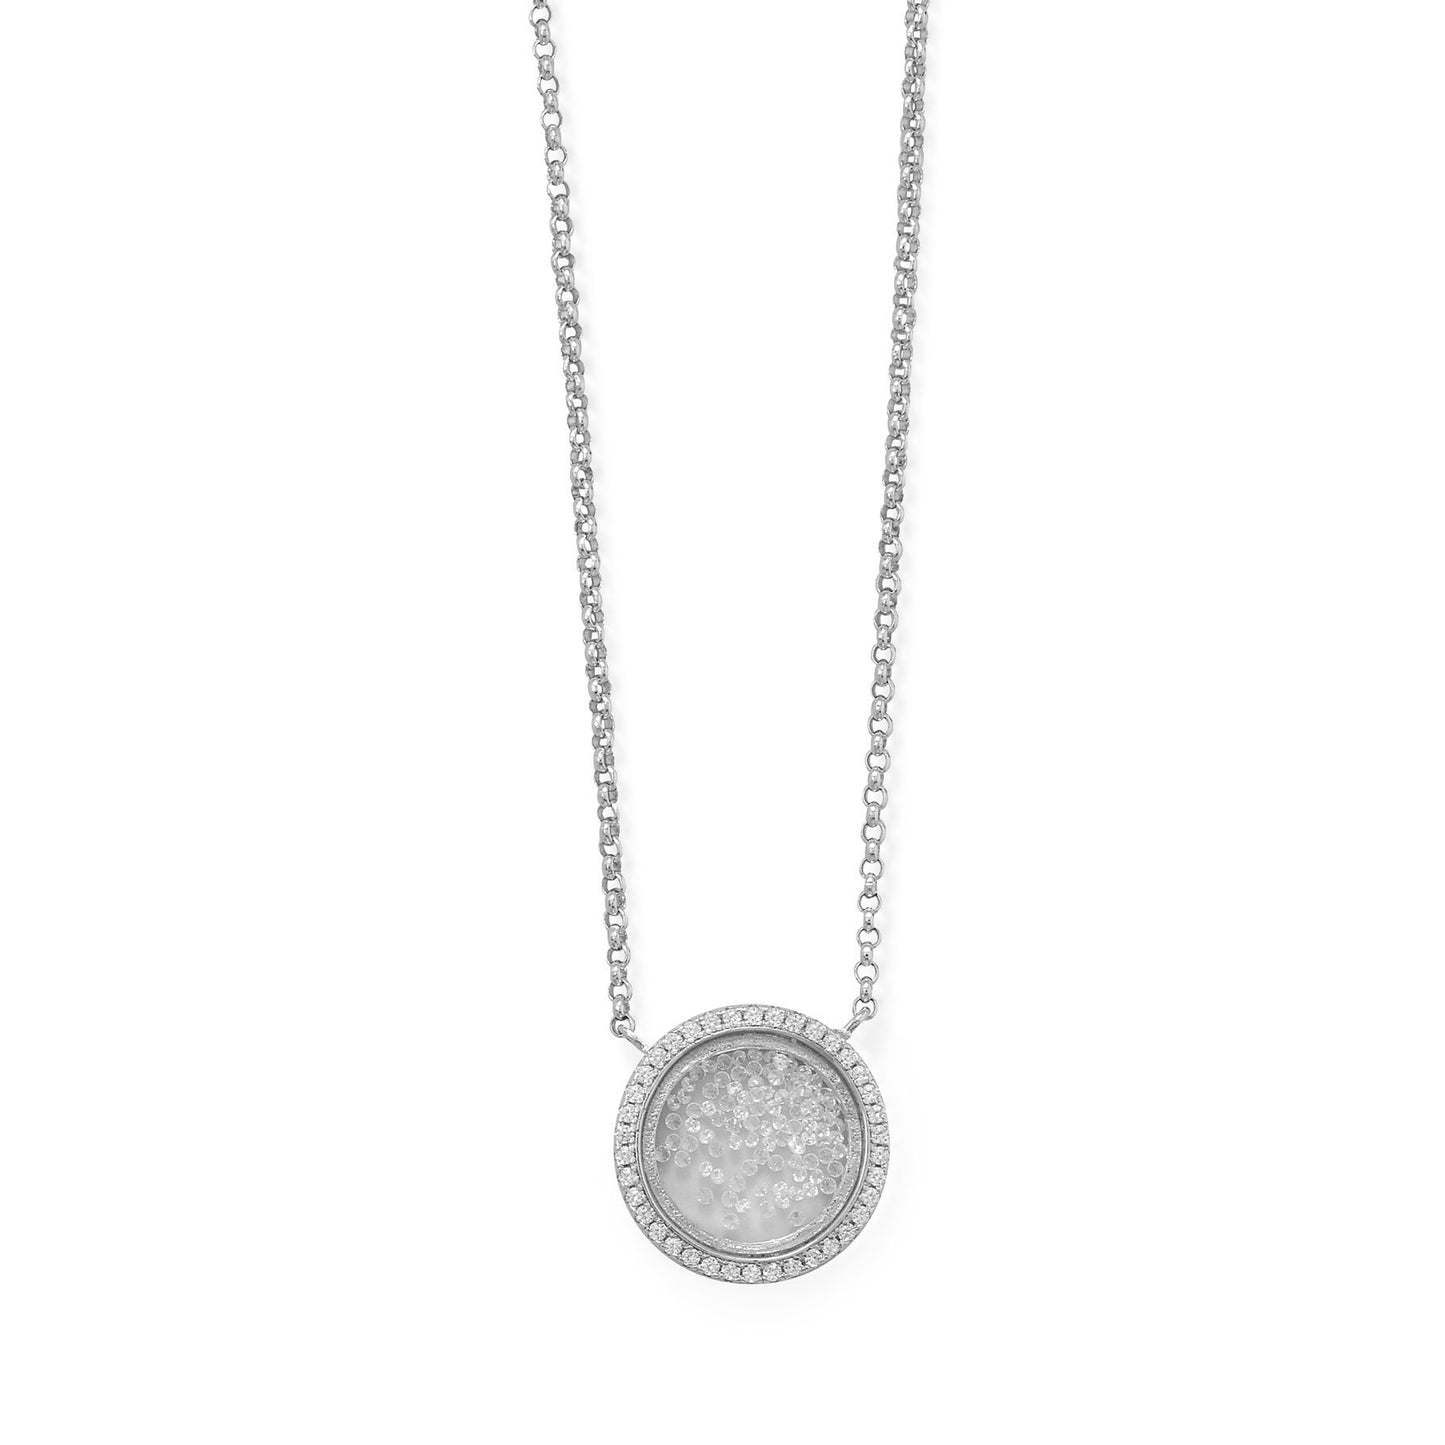 Rhodium Plated Sterling Silver Dancing CZs Necklace